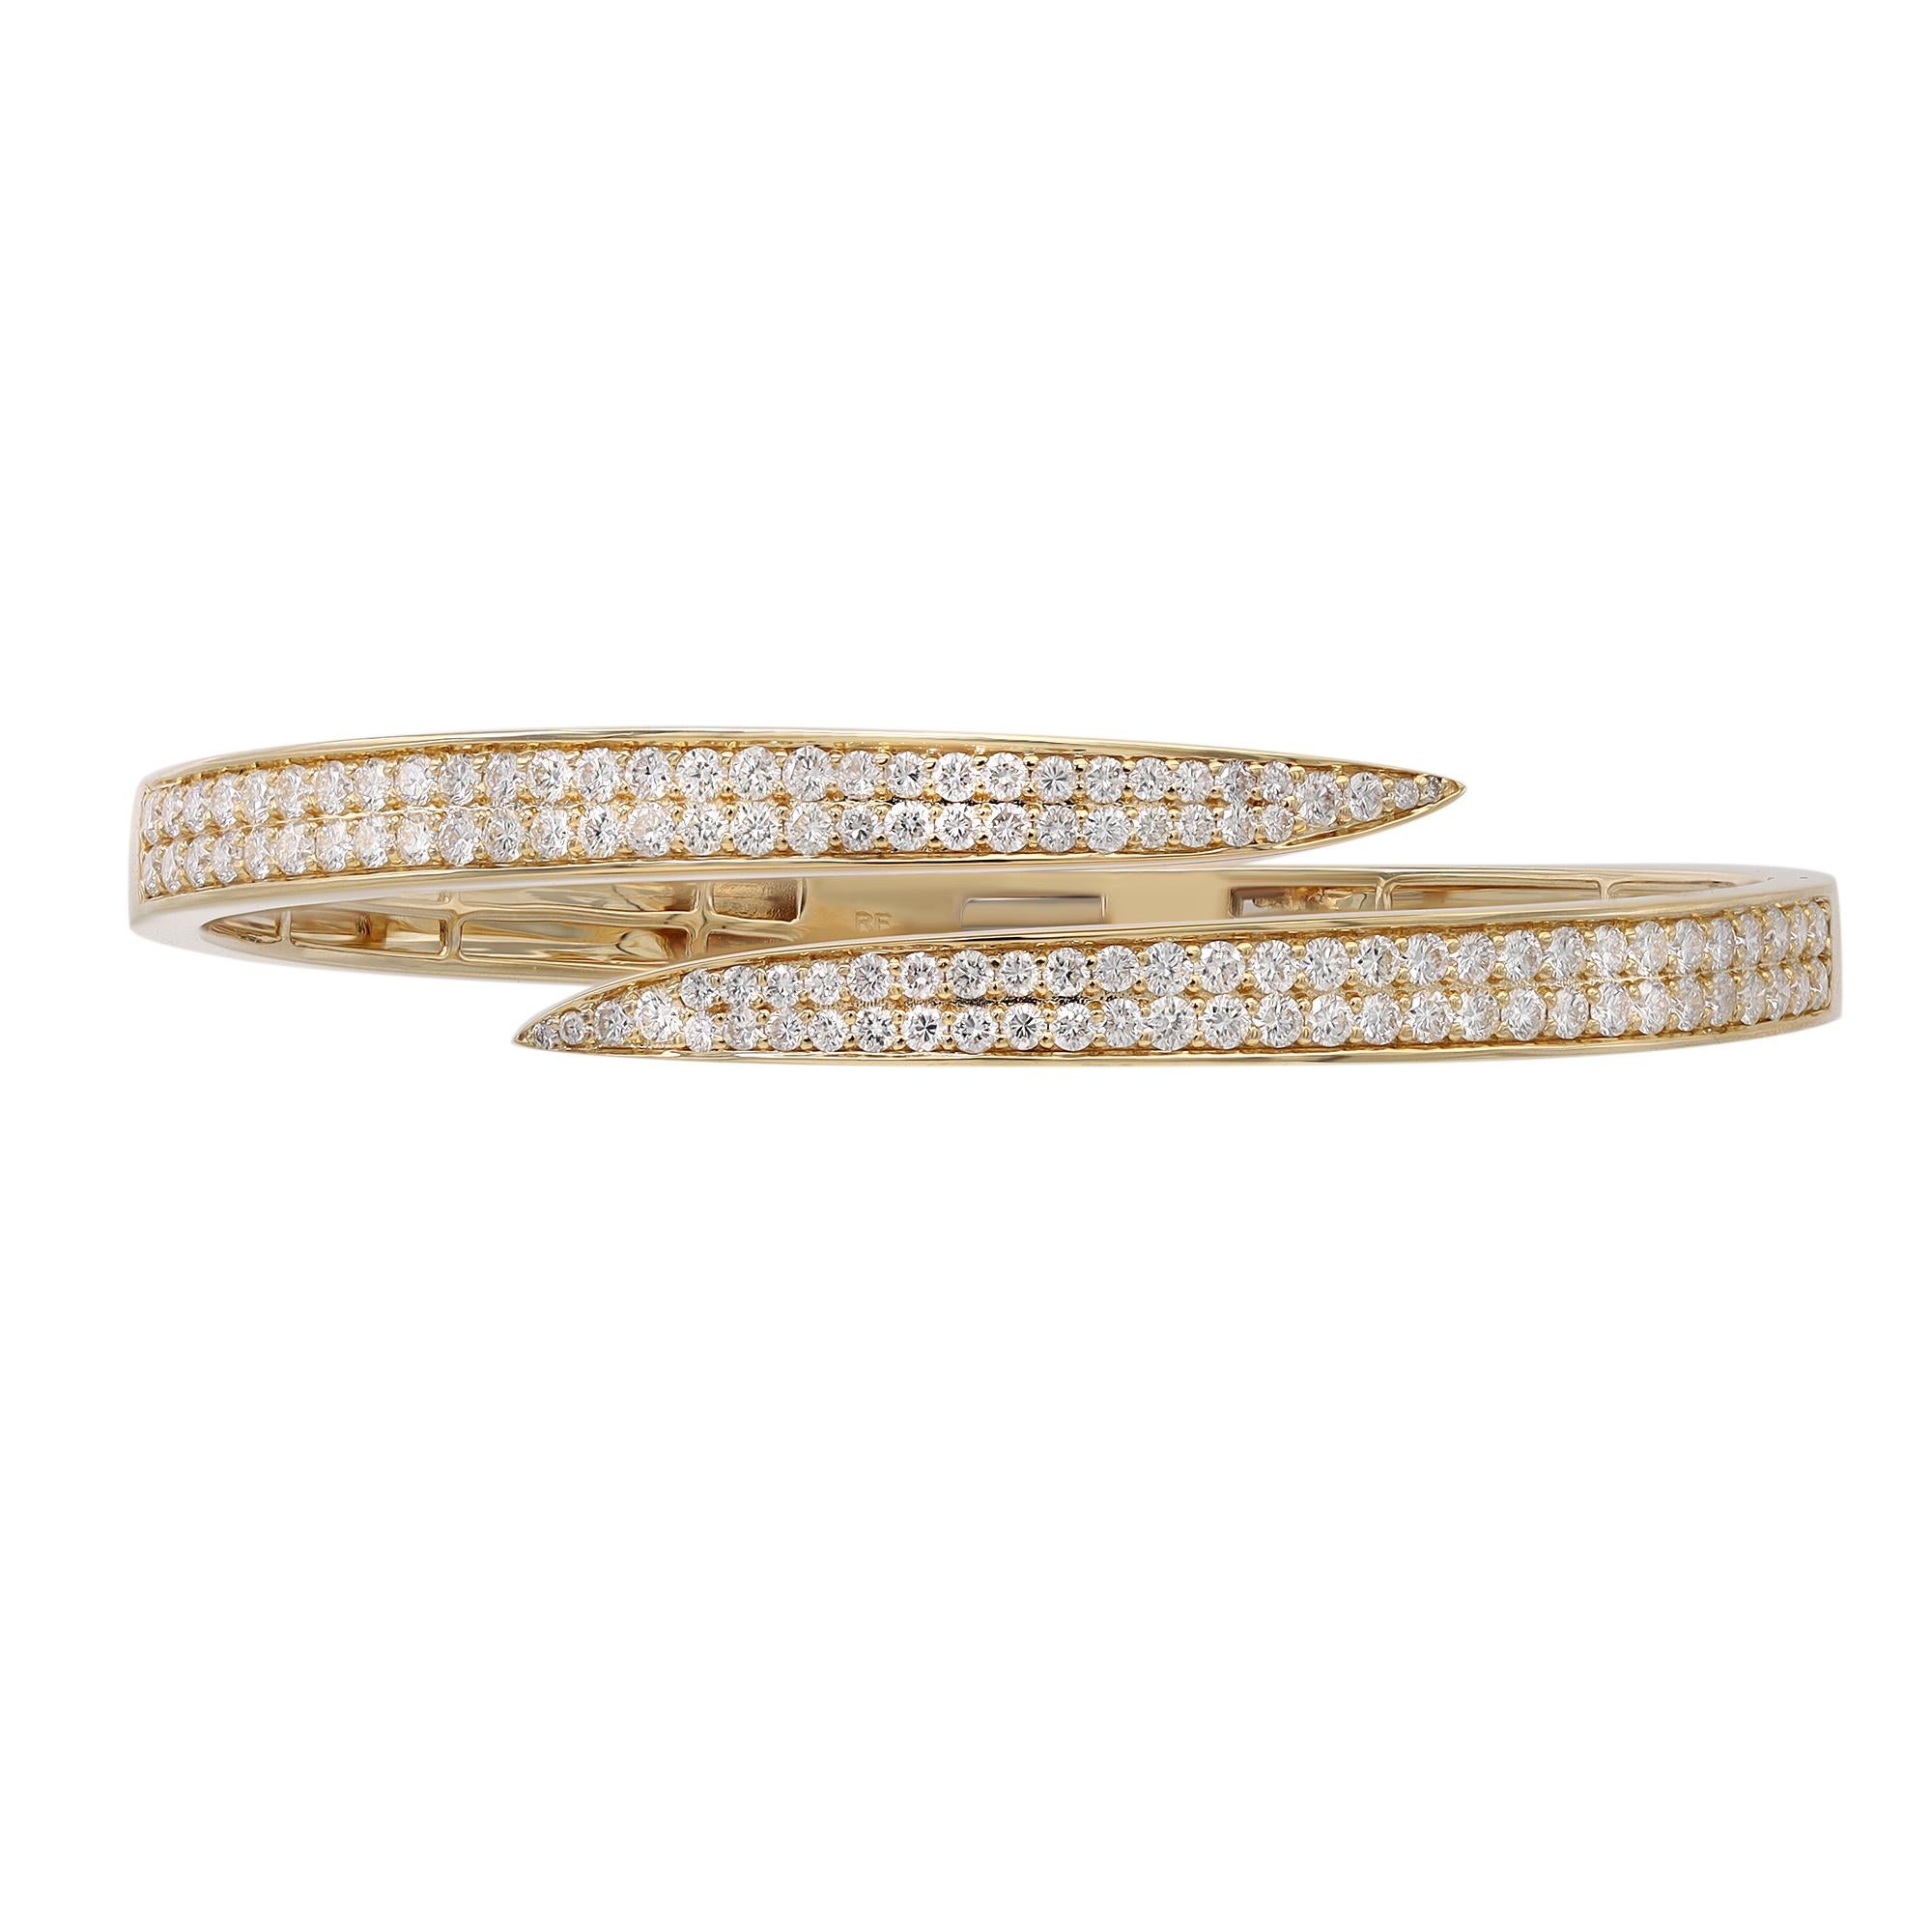 Rachel Koen Pave Set Round Cut Diamond Bangle Bracelet 18K Yellow Gold 2.83Cttw In New Condition For Sale In New York, NY